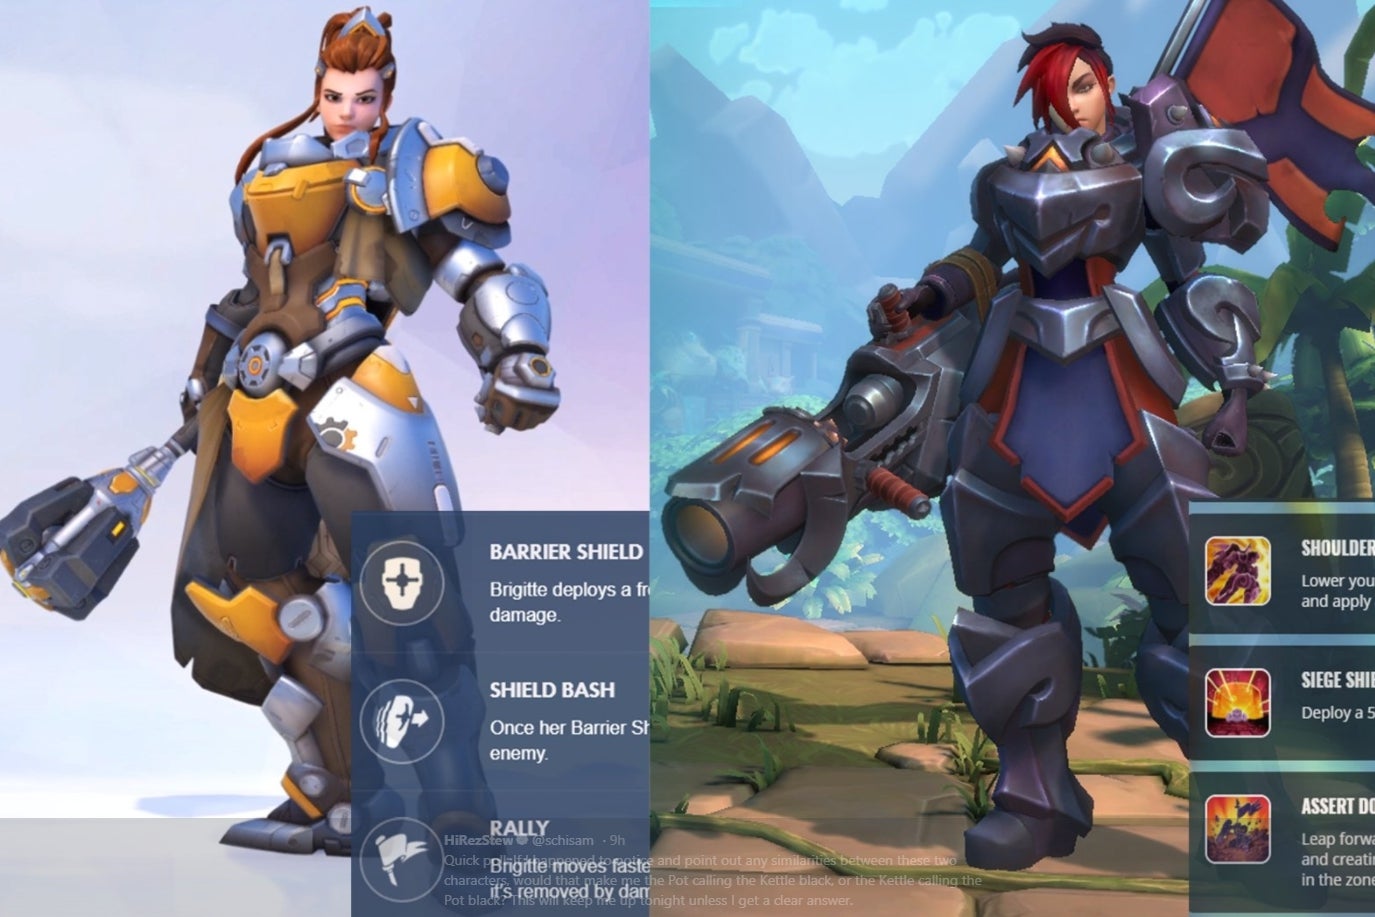 Image for New Overwatch hero looks like one of our heroes, says Paladins maker